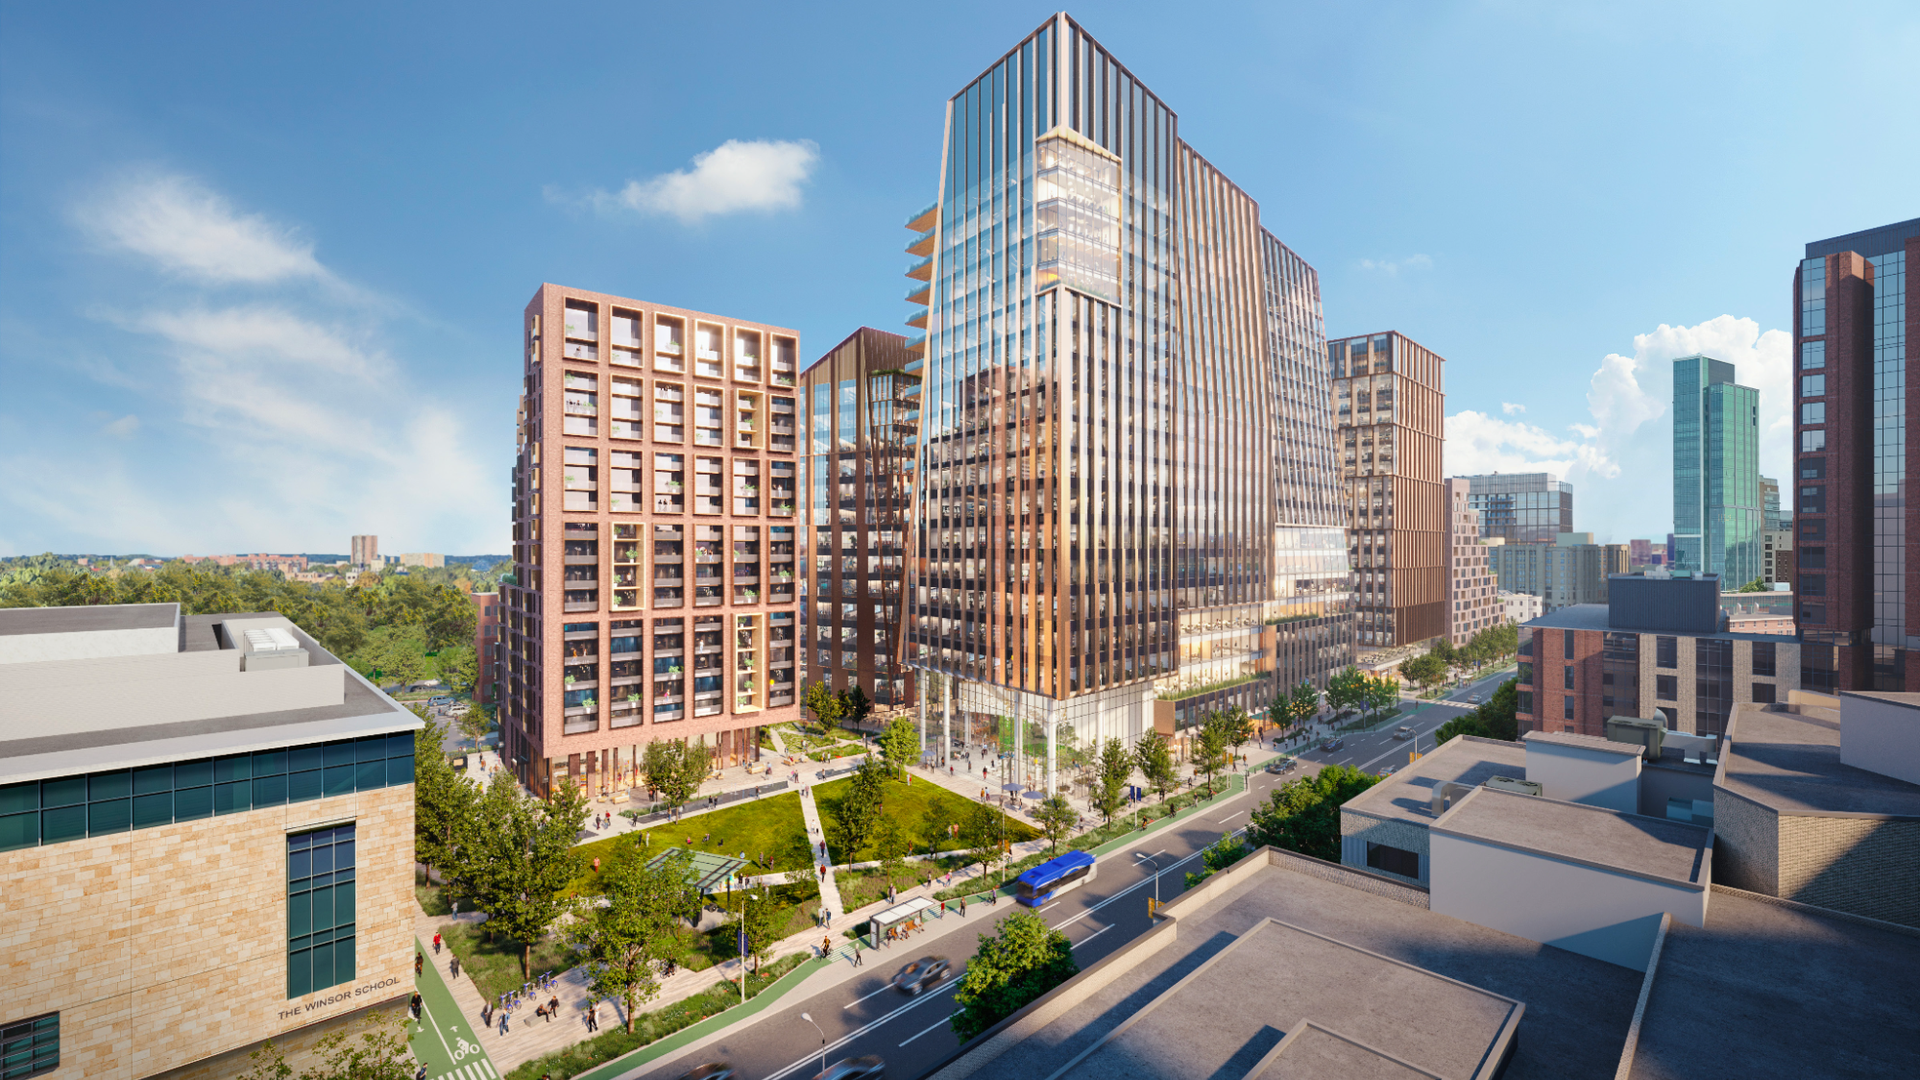 A proposed glassy-looking, mixed-use development on Brookline Avenue is set to include lab space, commercial space and 388 units.